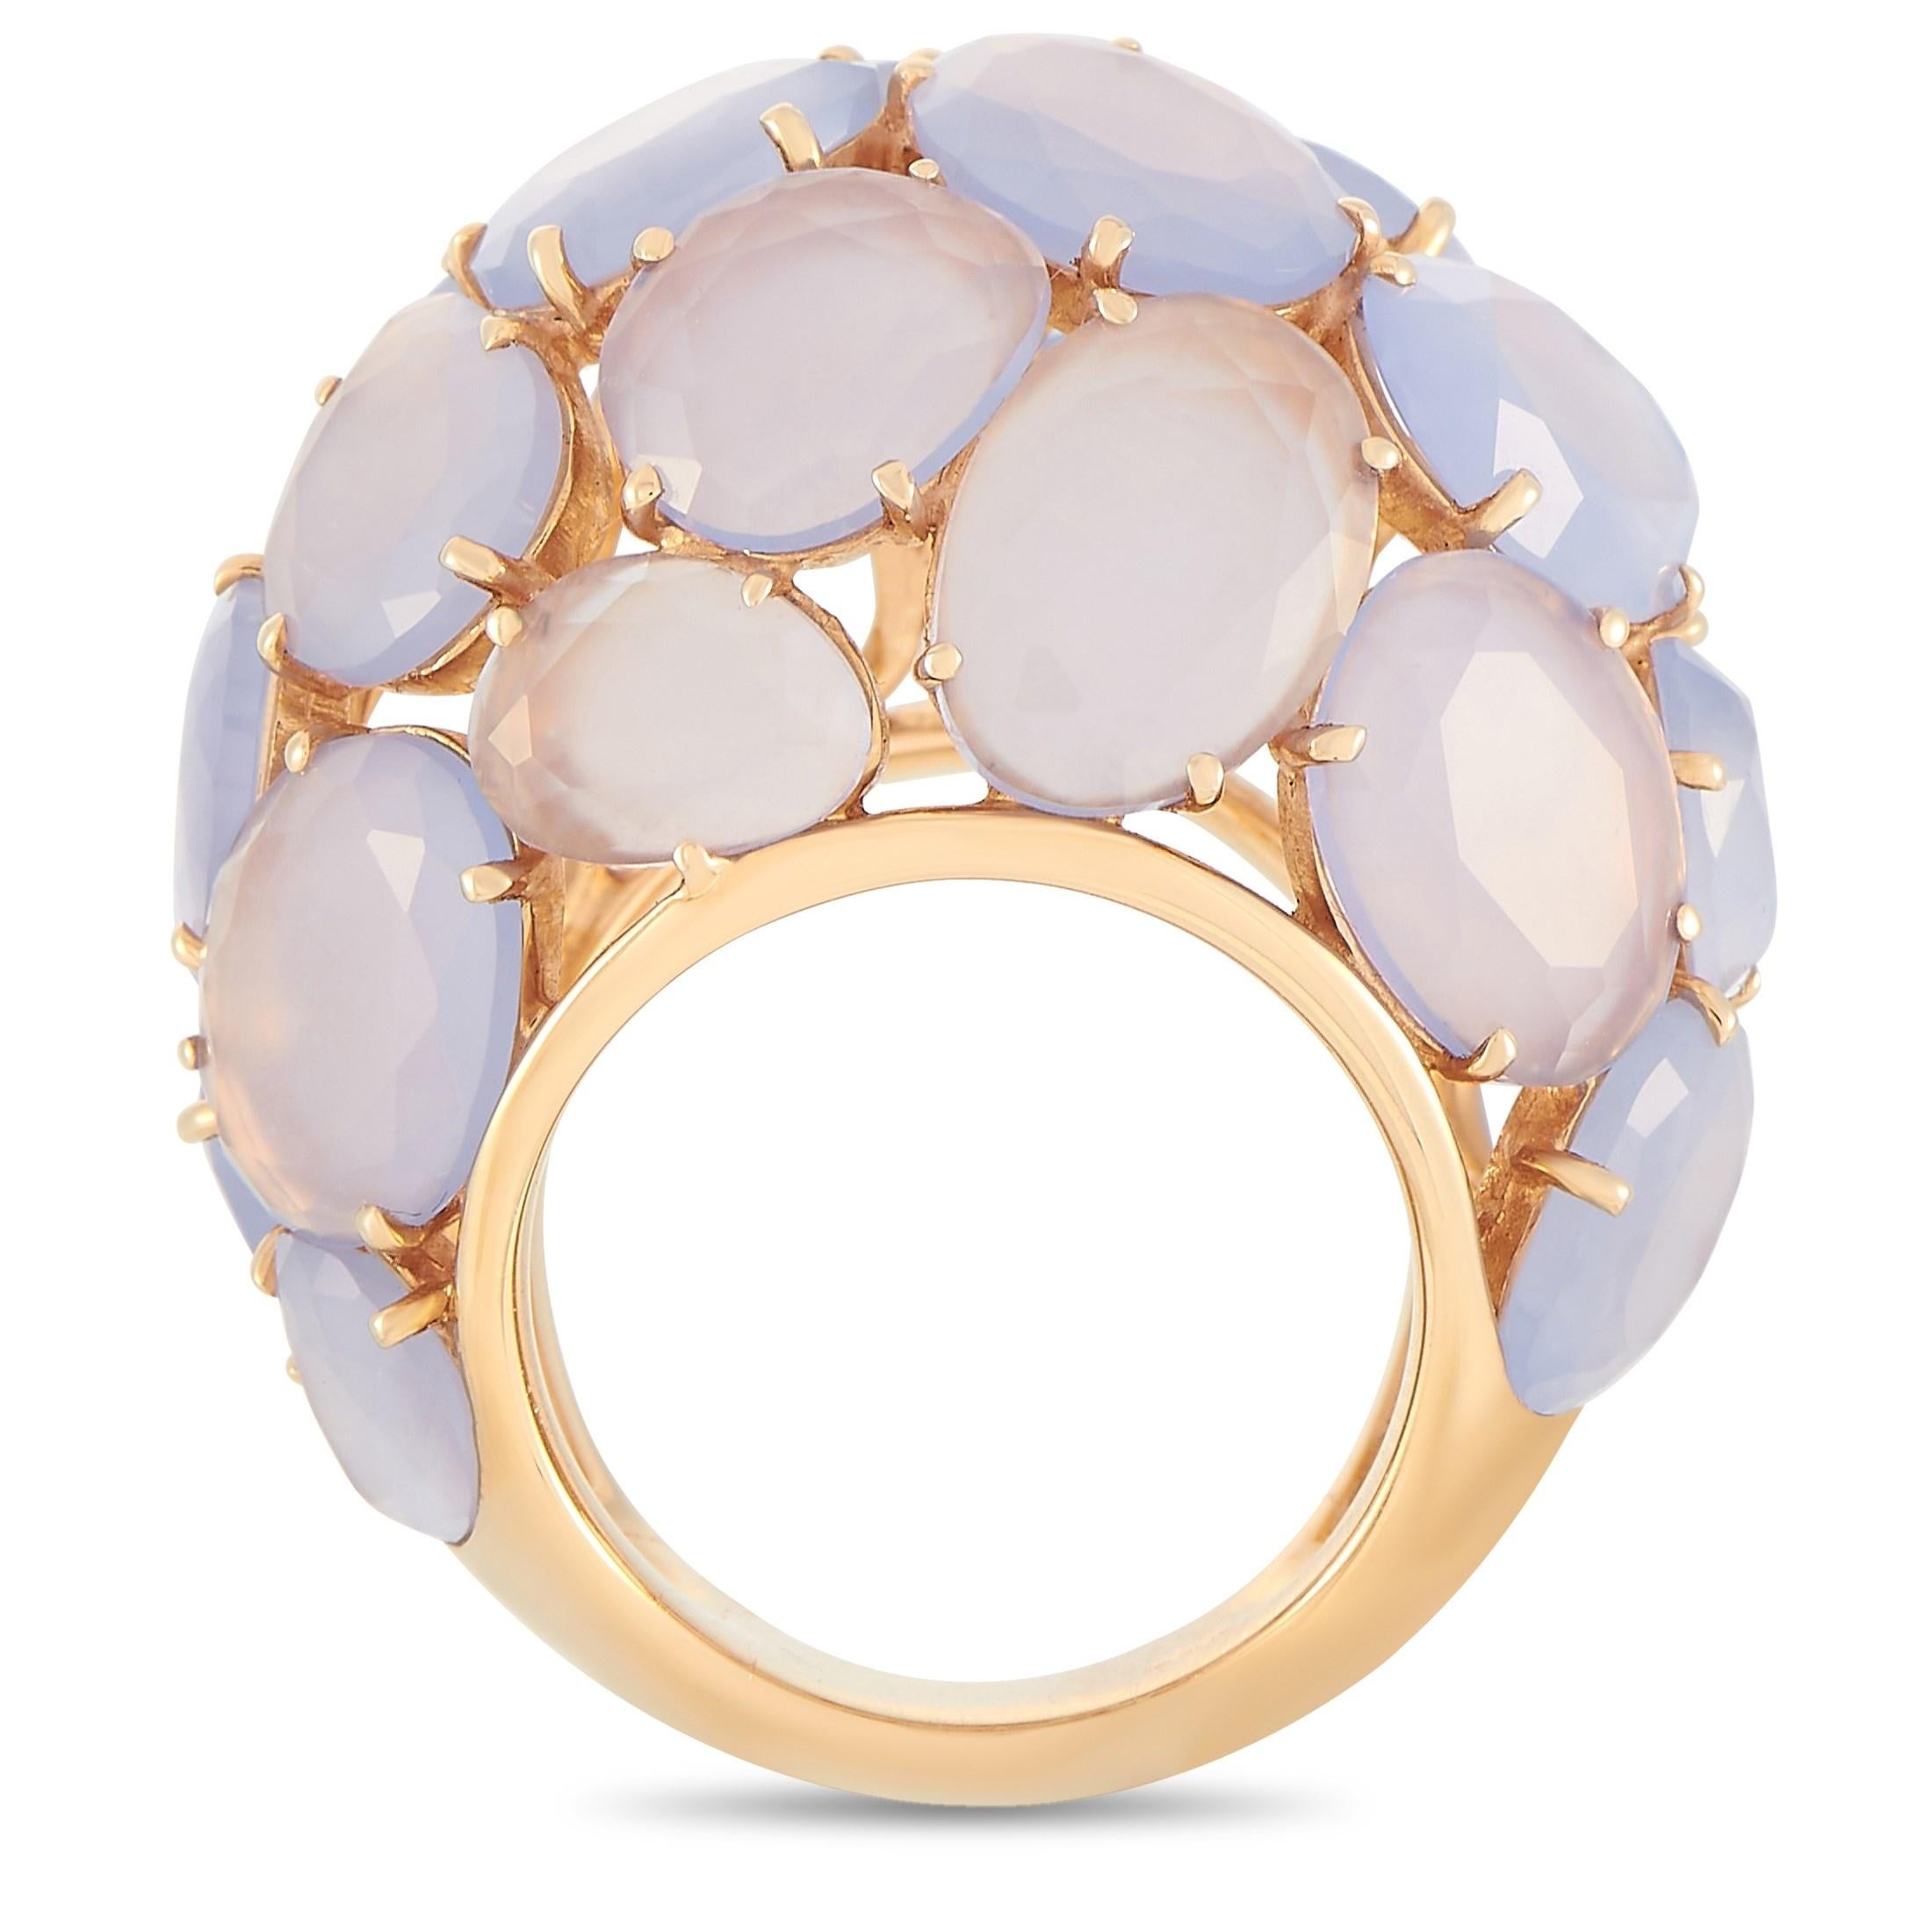 This glitzed up dome ring is one you can count on when you need to spruce up your look. The Pomellato 18K Rose Gold Capri Chalcedony Dome Cocktail Ring features a wide 7mm band with 22mm by 30mm top dimensions. Set with a strong healing stone -